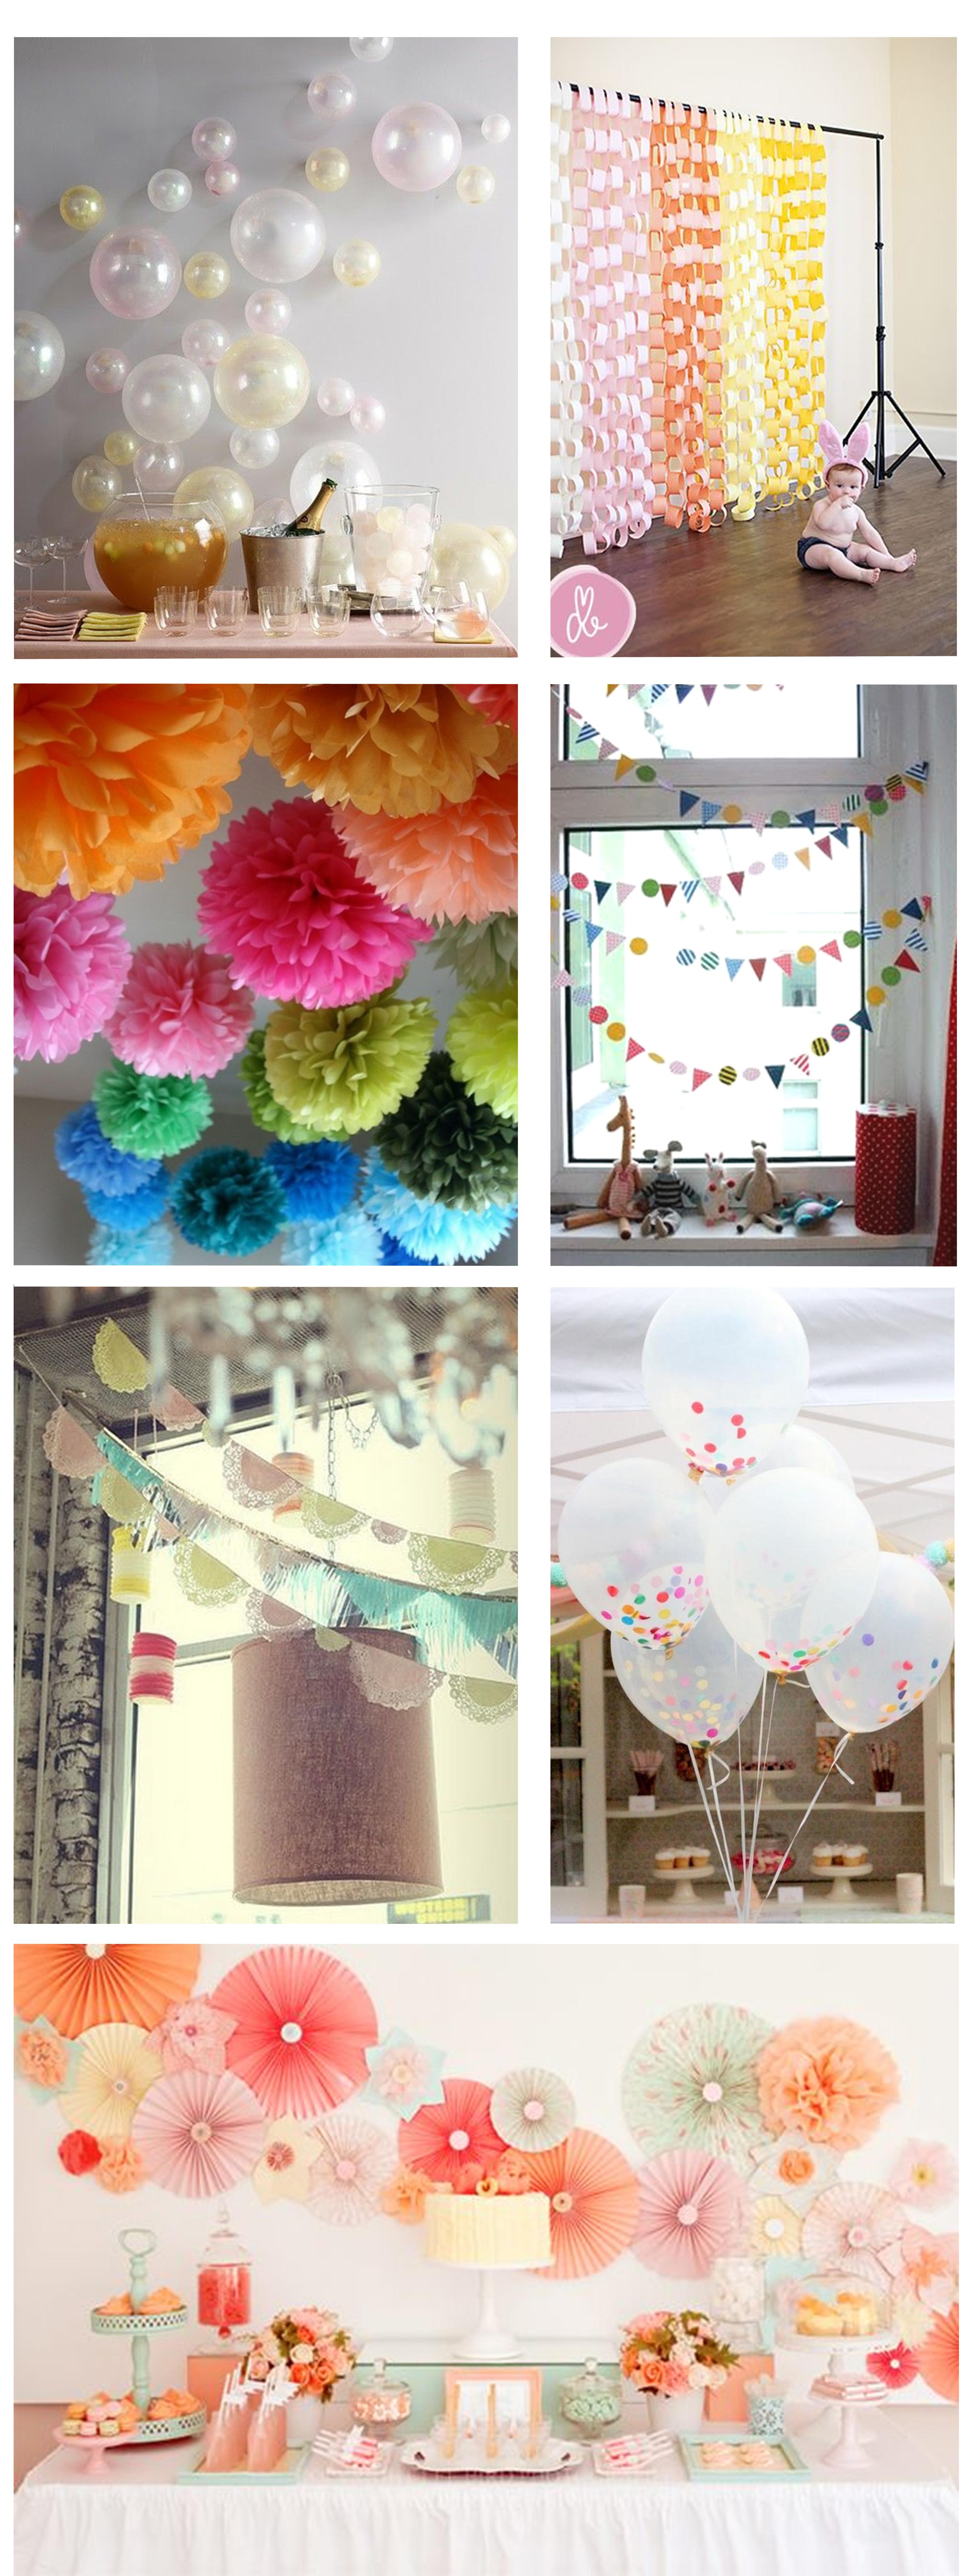 Ideas for homemade party decorations My Thrifty Life by